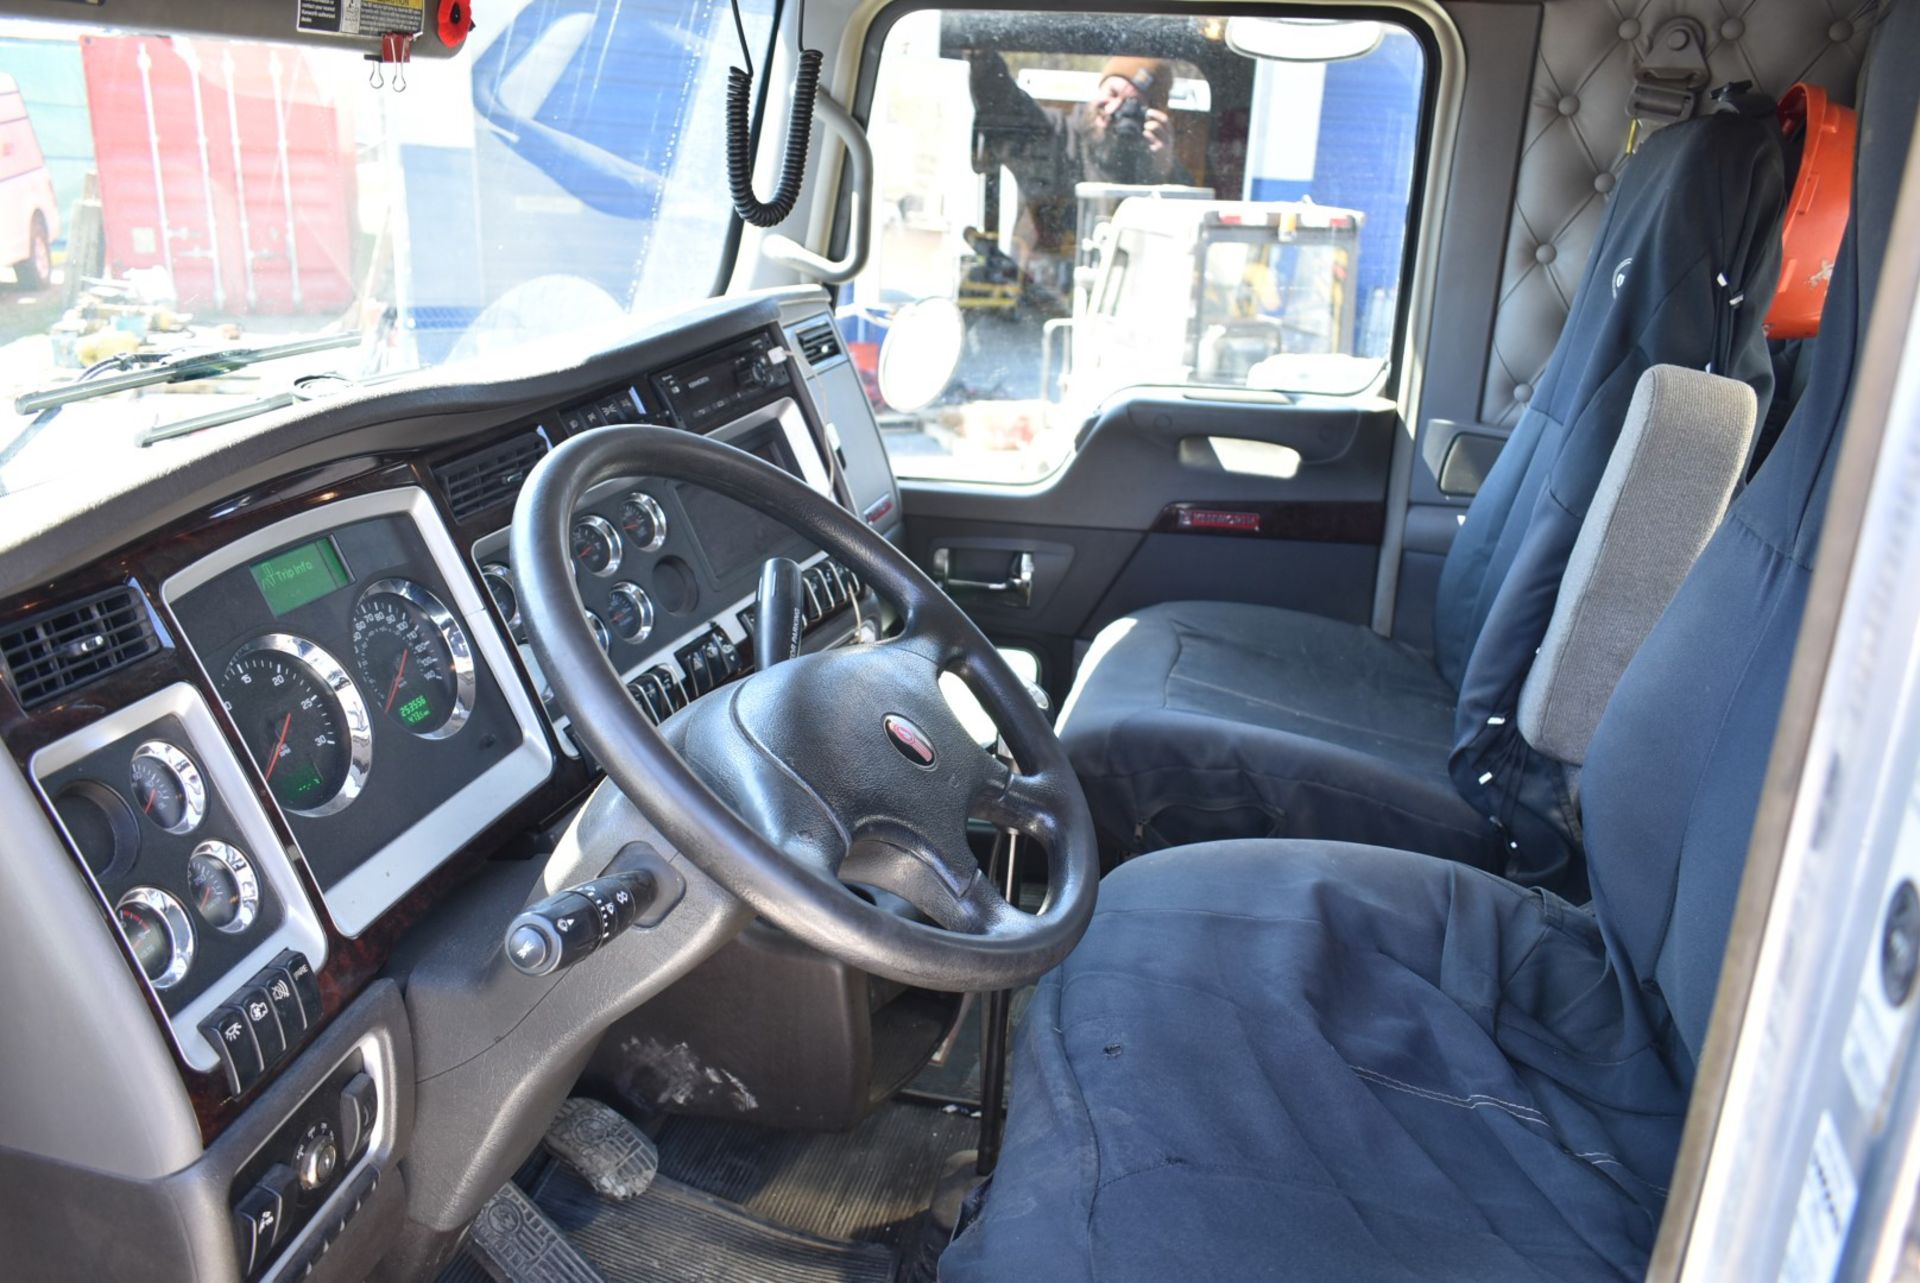 KENWORTH (2018) T800 TRI-DRIVE SEMI-TRACTOR TRUCK WITH DAY CAB, CUMMINS ISX-565 DIESEL ENGINE, - Image 10 of 16